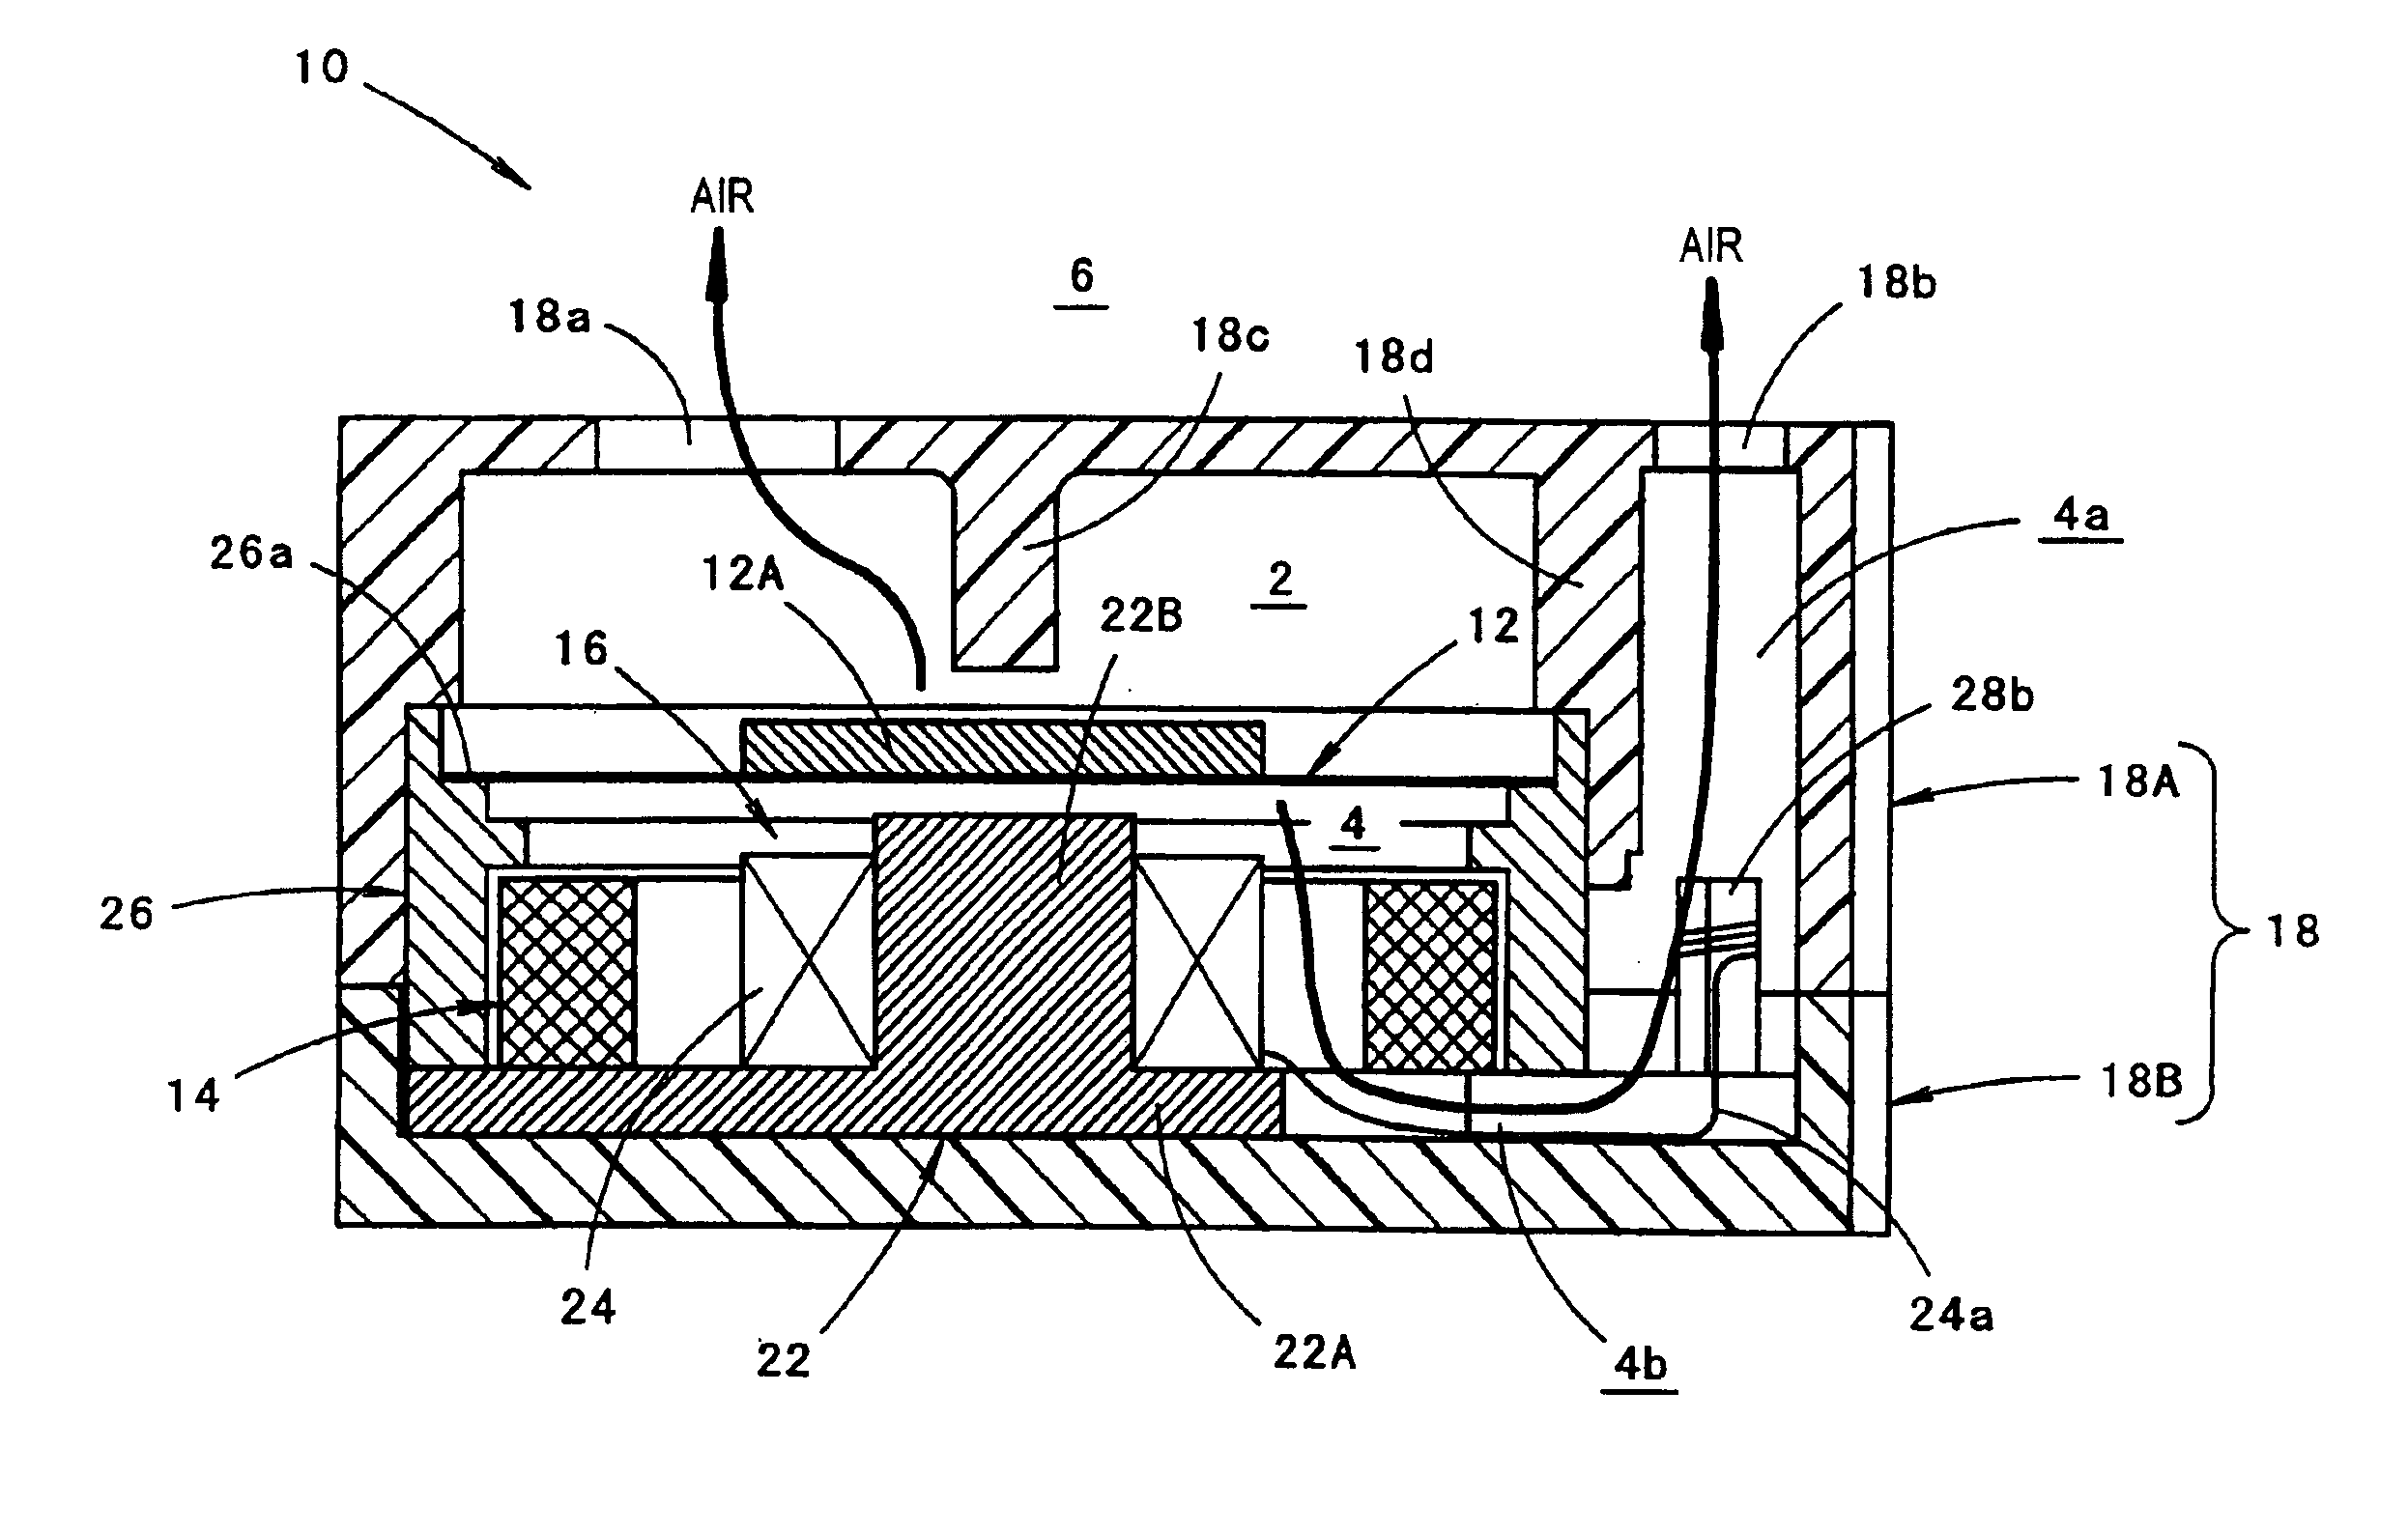 Electromagnetic electroacoustic transducer